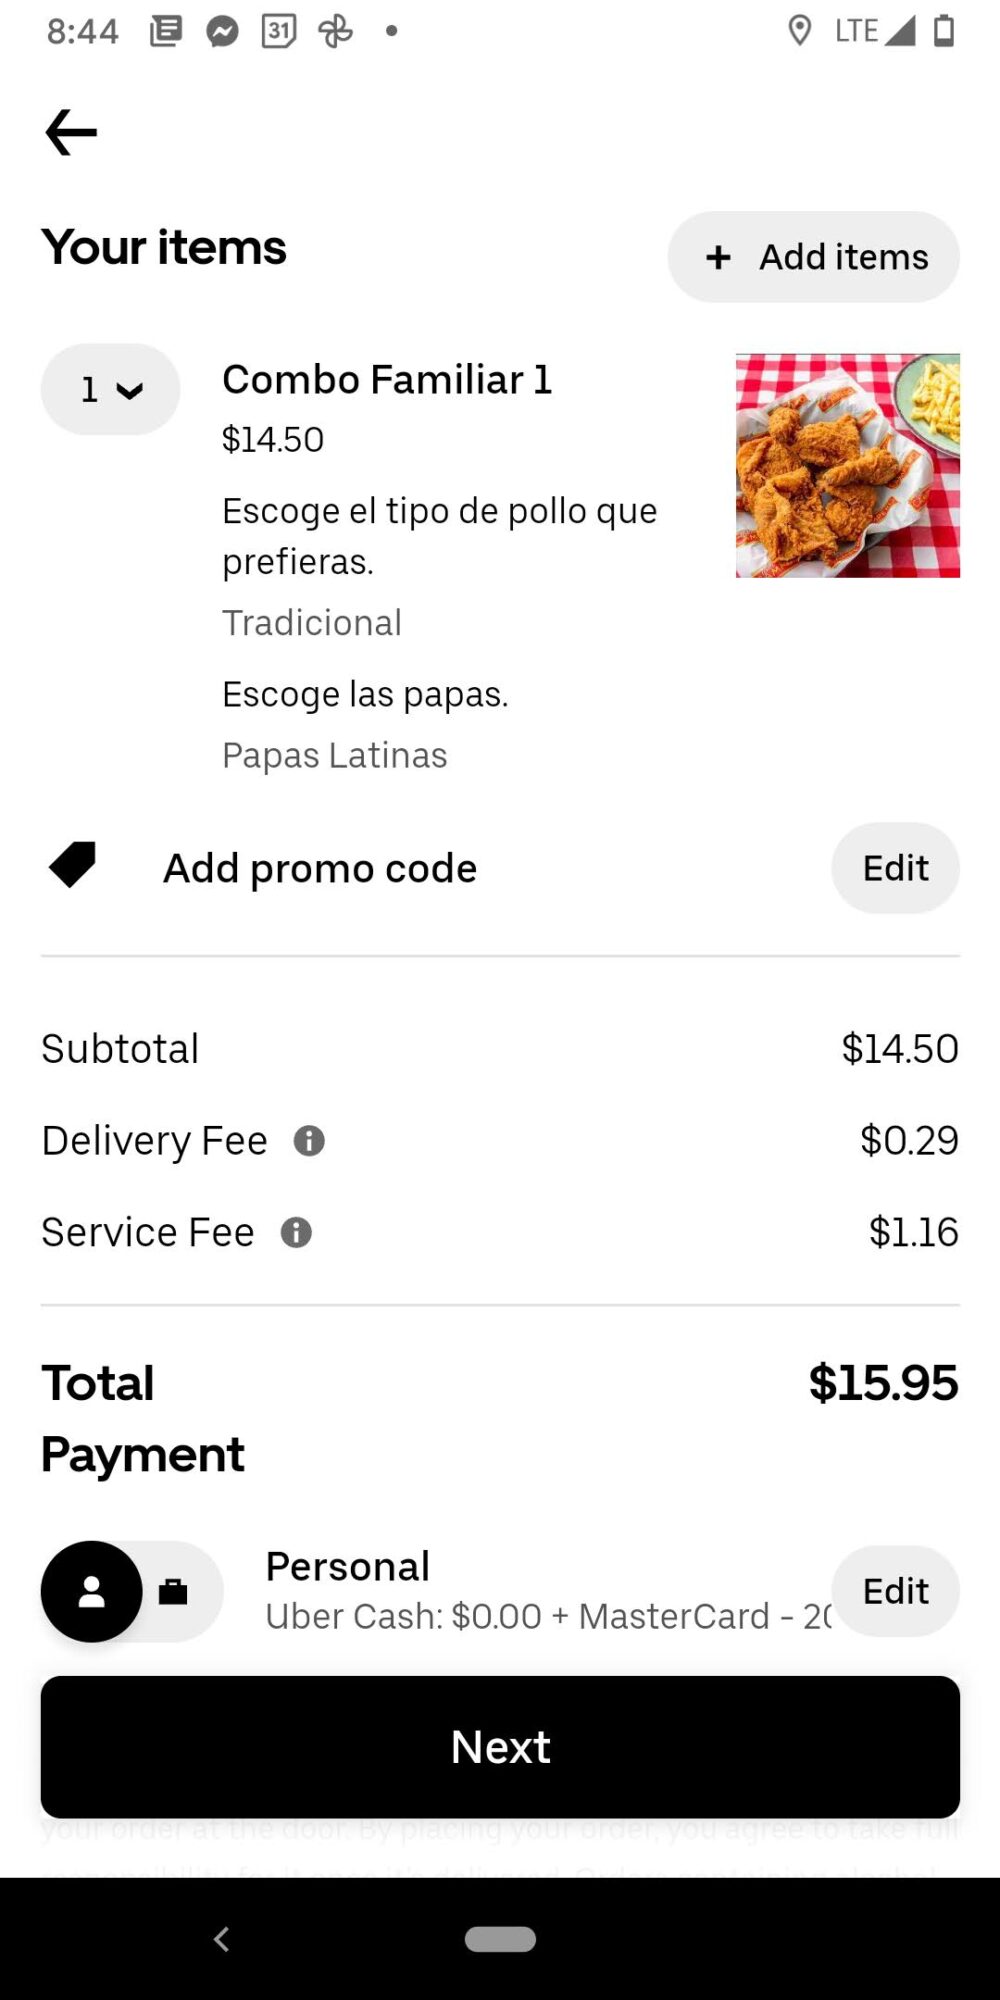  Note the low delivery and service fees for my UberEats order in Quito, Ecuador: just $15.95 total.